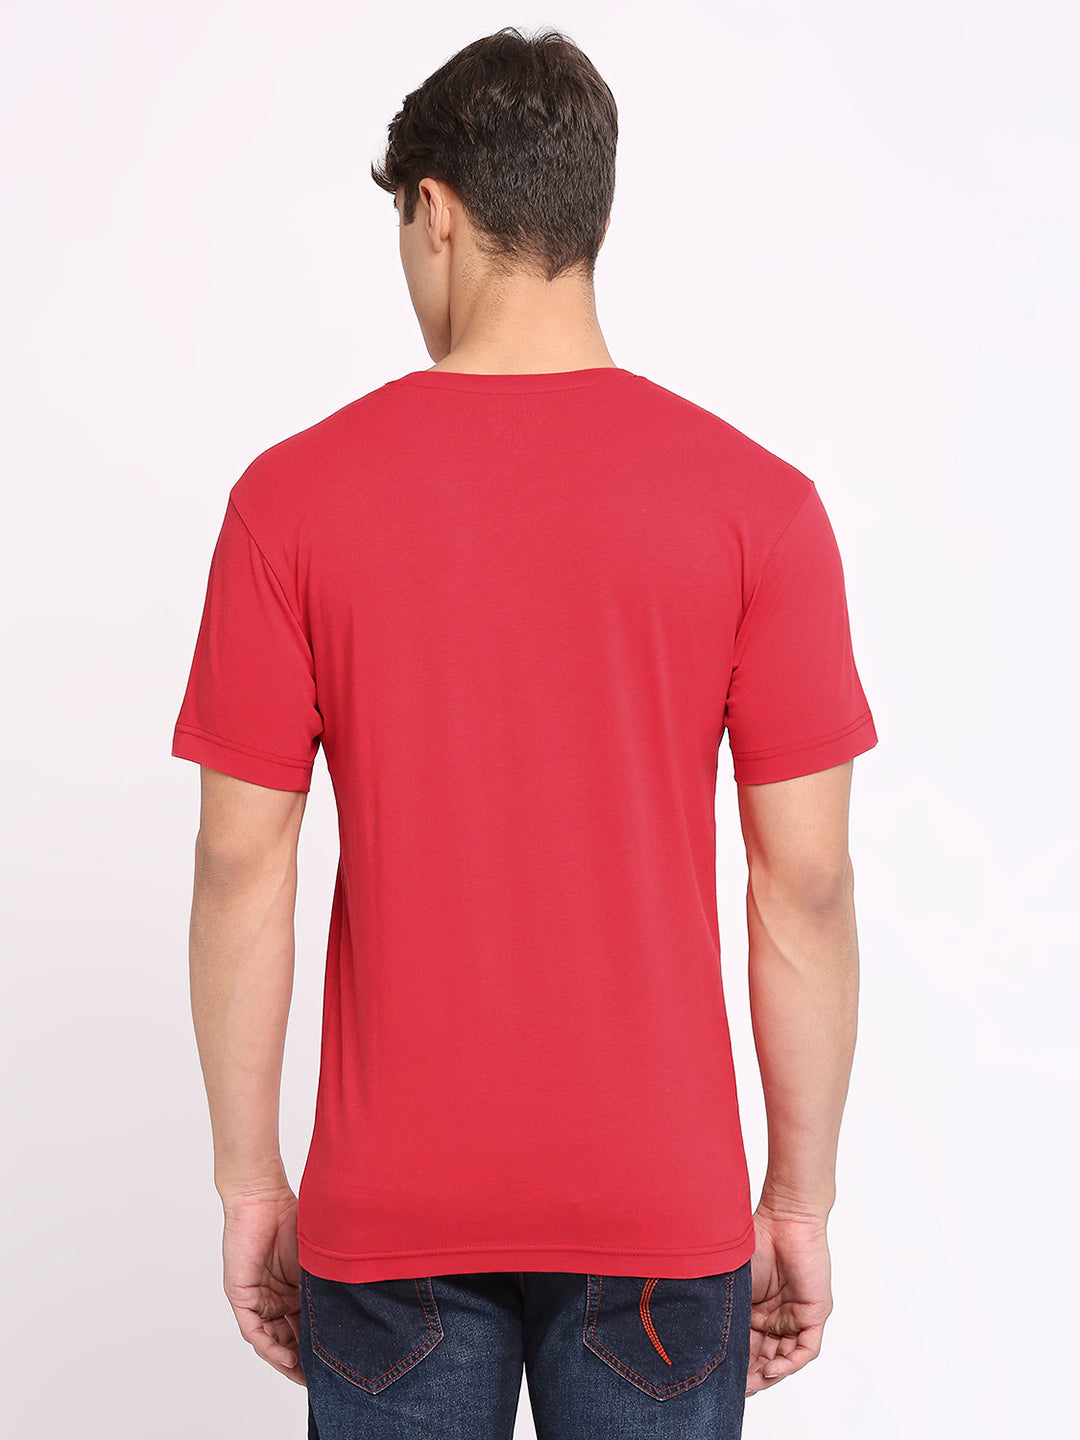 Frenchie Mens Red Round Neck T-Shirt